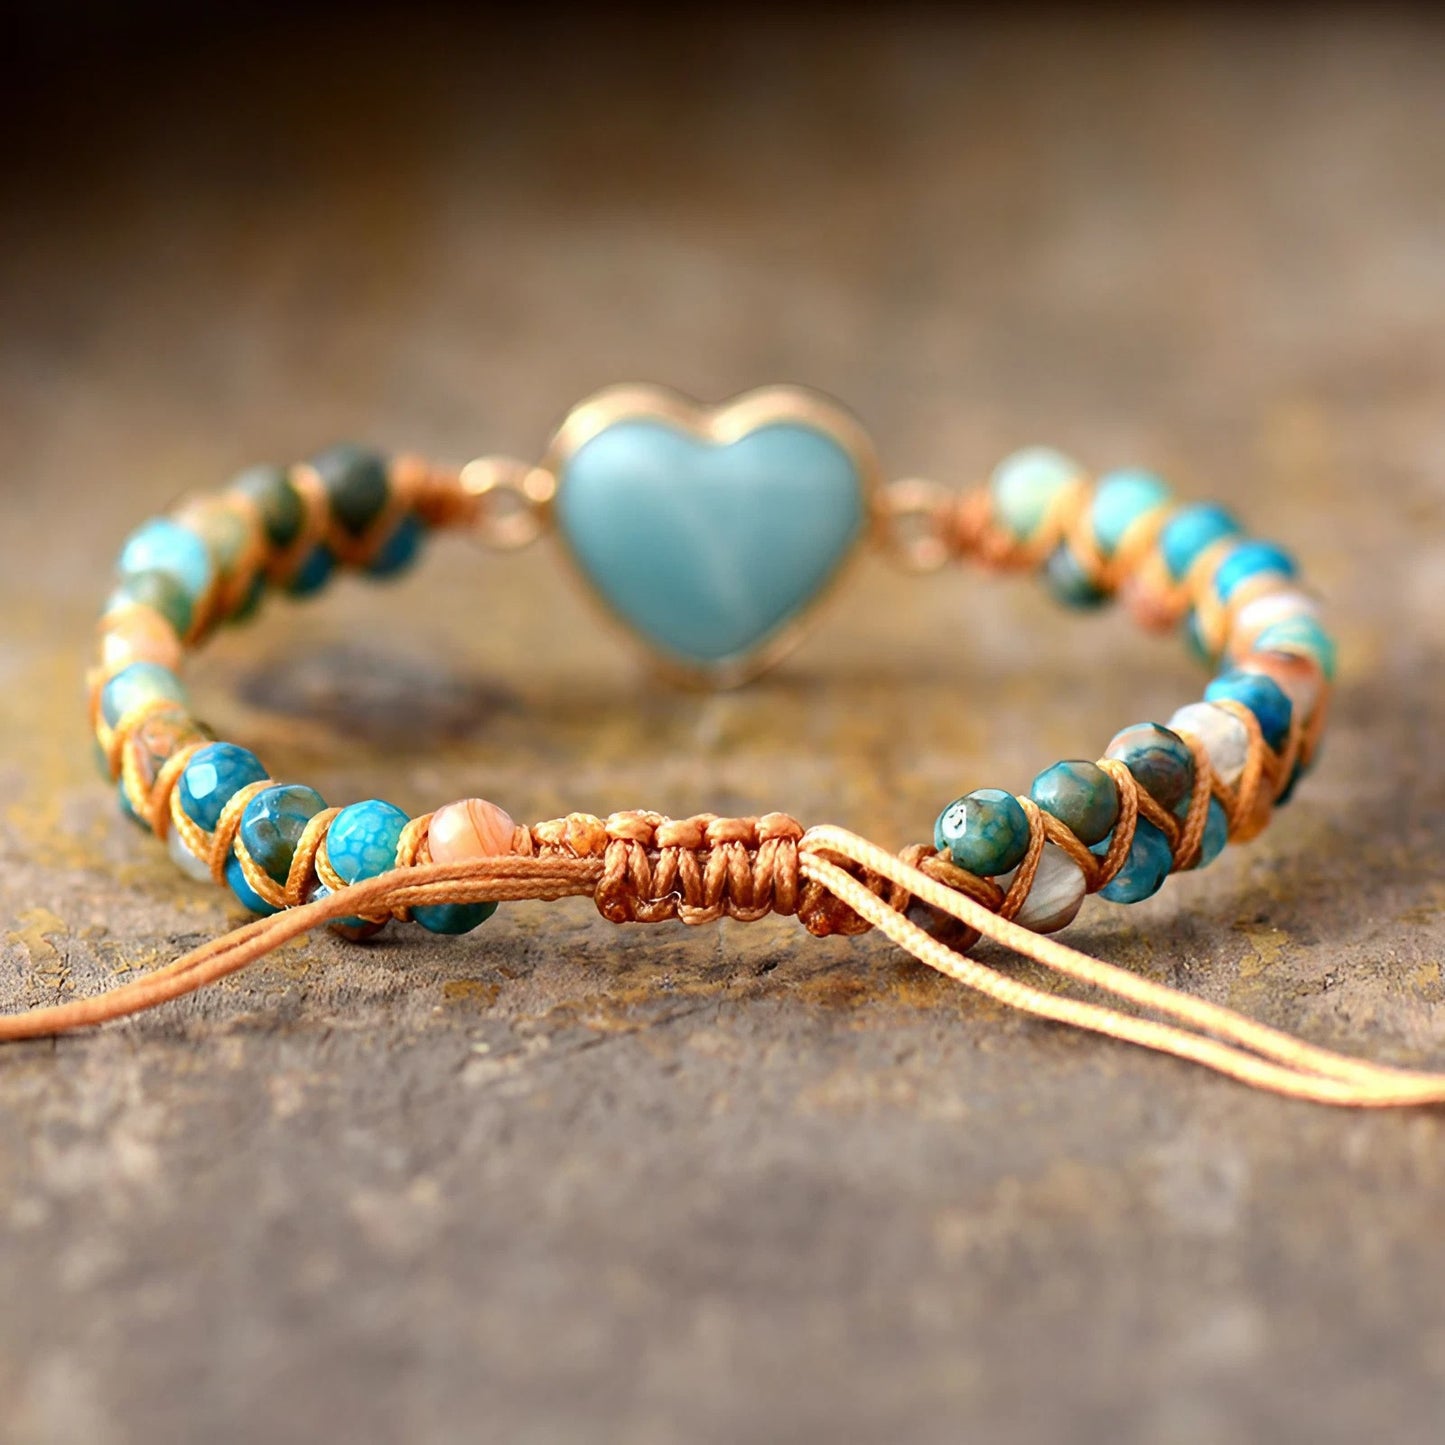 Handcrafted Amazonite Bracelet with Heart Shapes